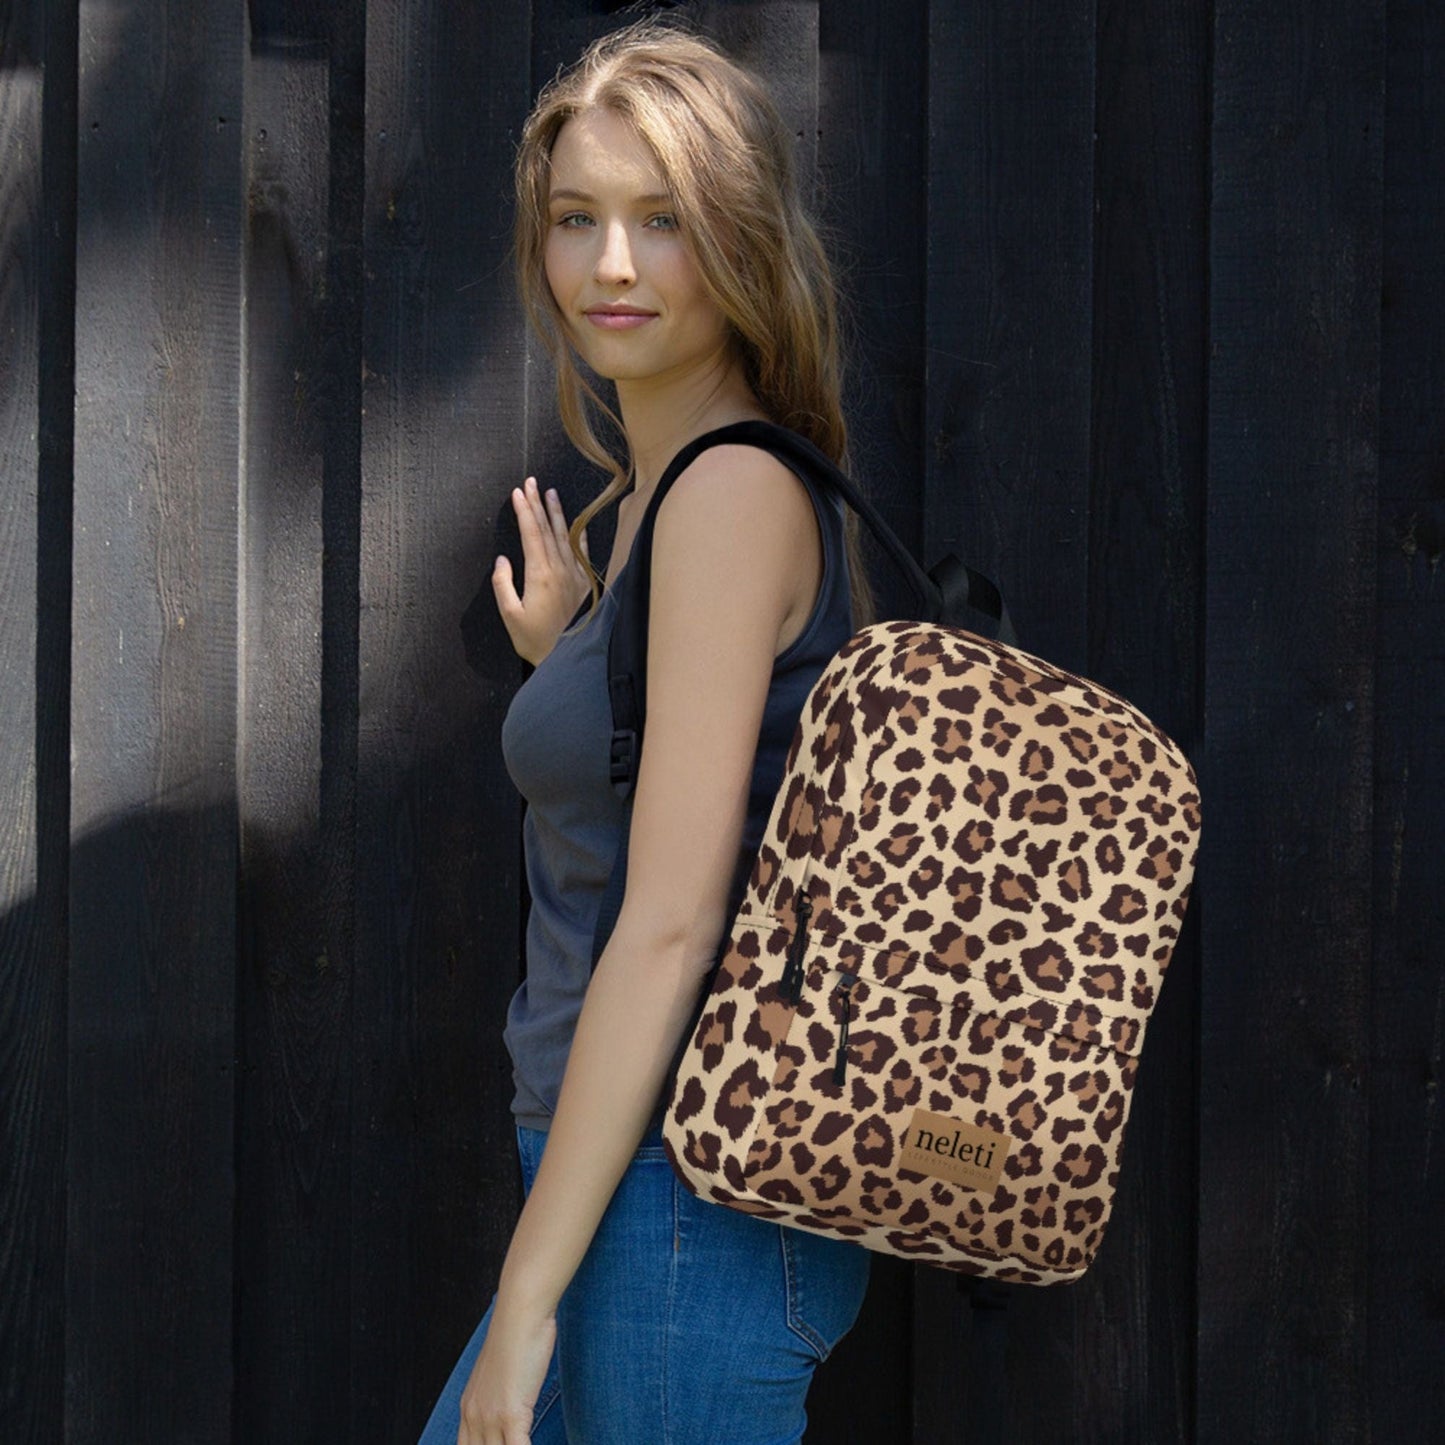 neleti.com-backpacks-for-school-with-leopard-print